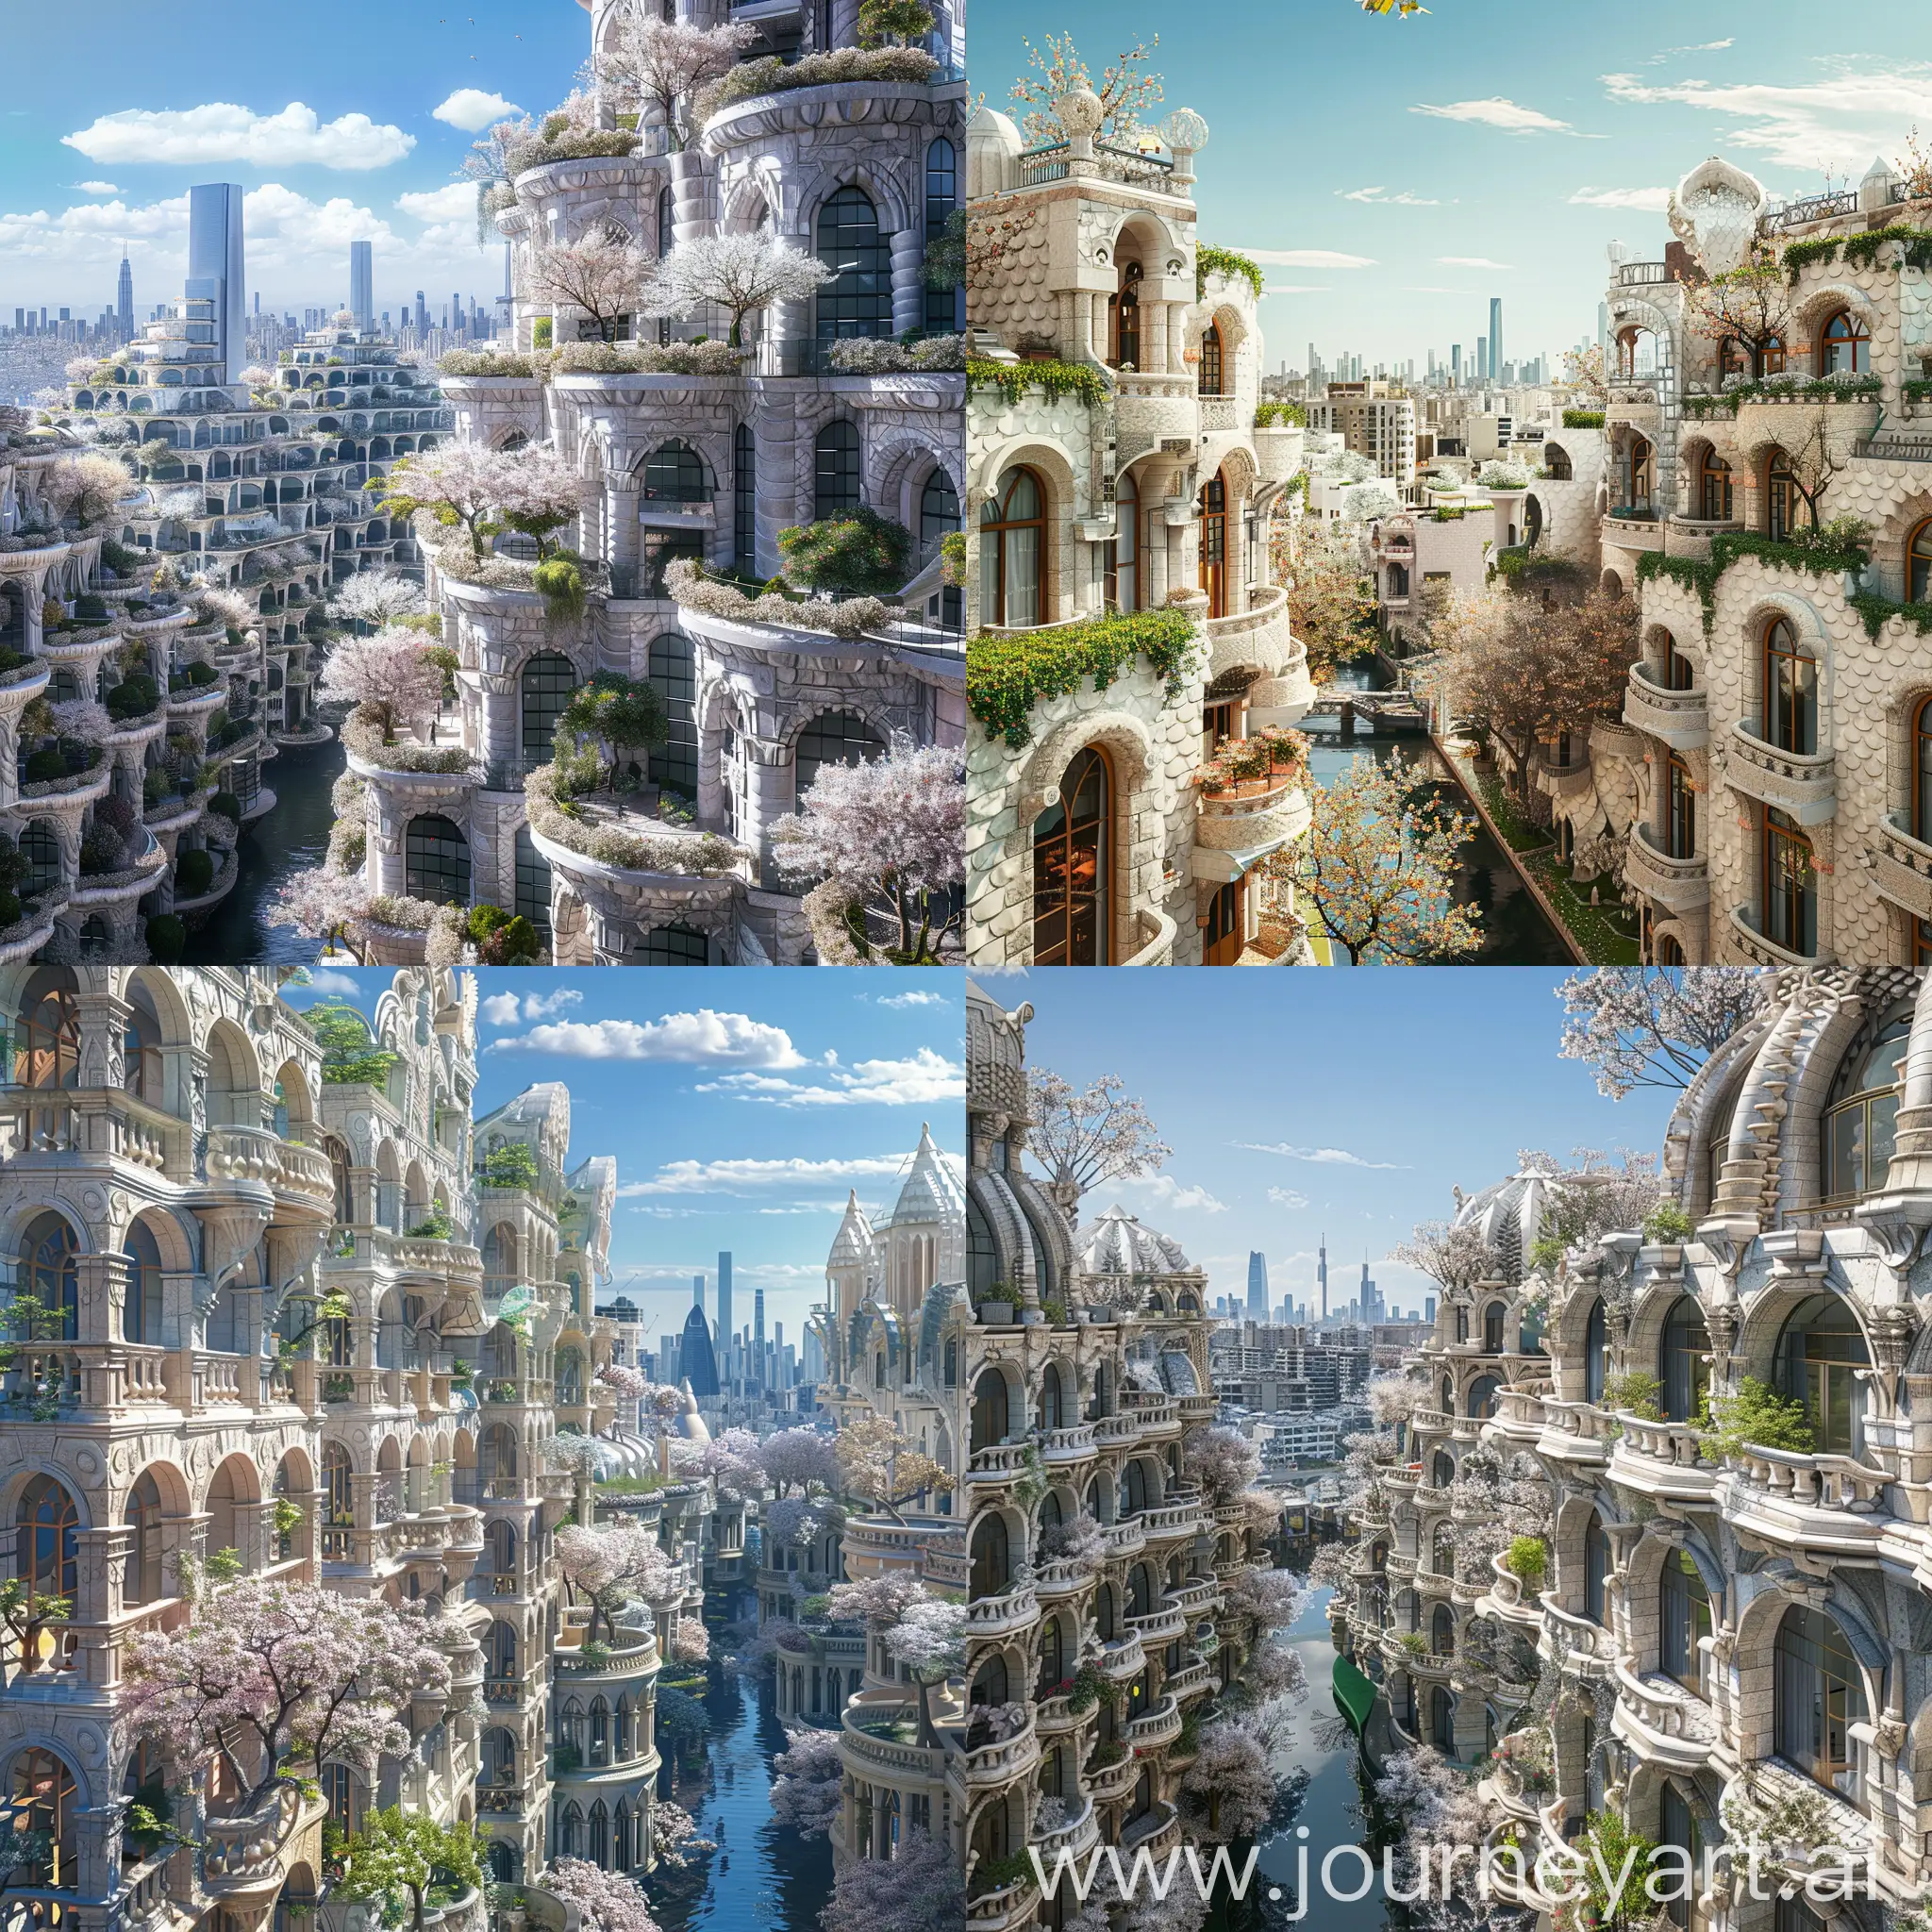 Beautiful futuristic metropolis in an alternate timeline where all buildings retain traditional elements, ornate travertine architecture with scale-like patterns on facades and blossoming trees, monumental terraced buildings, canals, Buenos Aires vibe, spring, supertall skyline in distance, blue sky, photograph